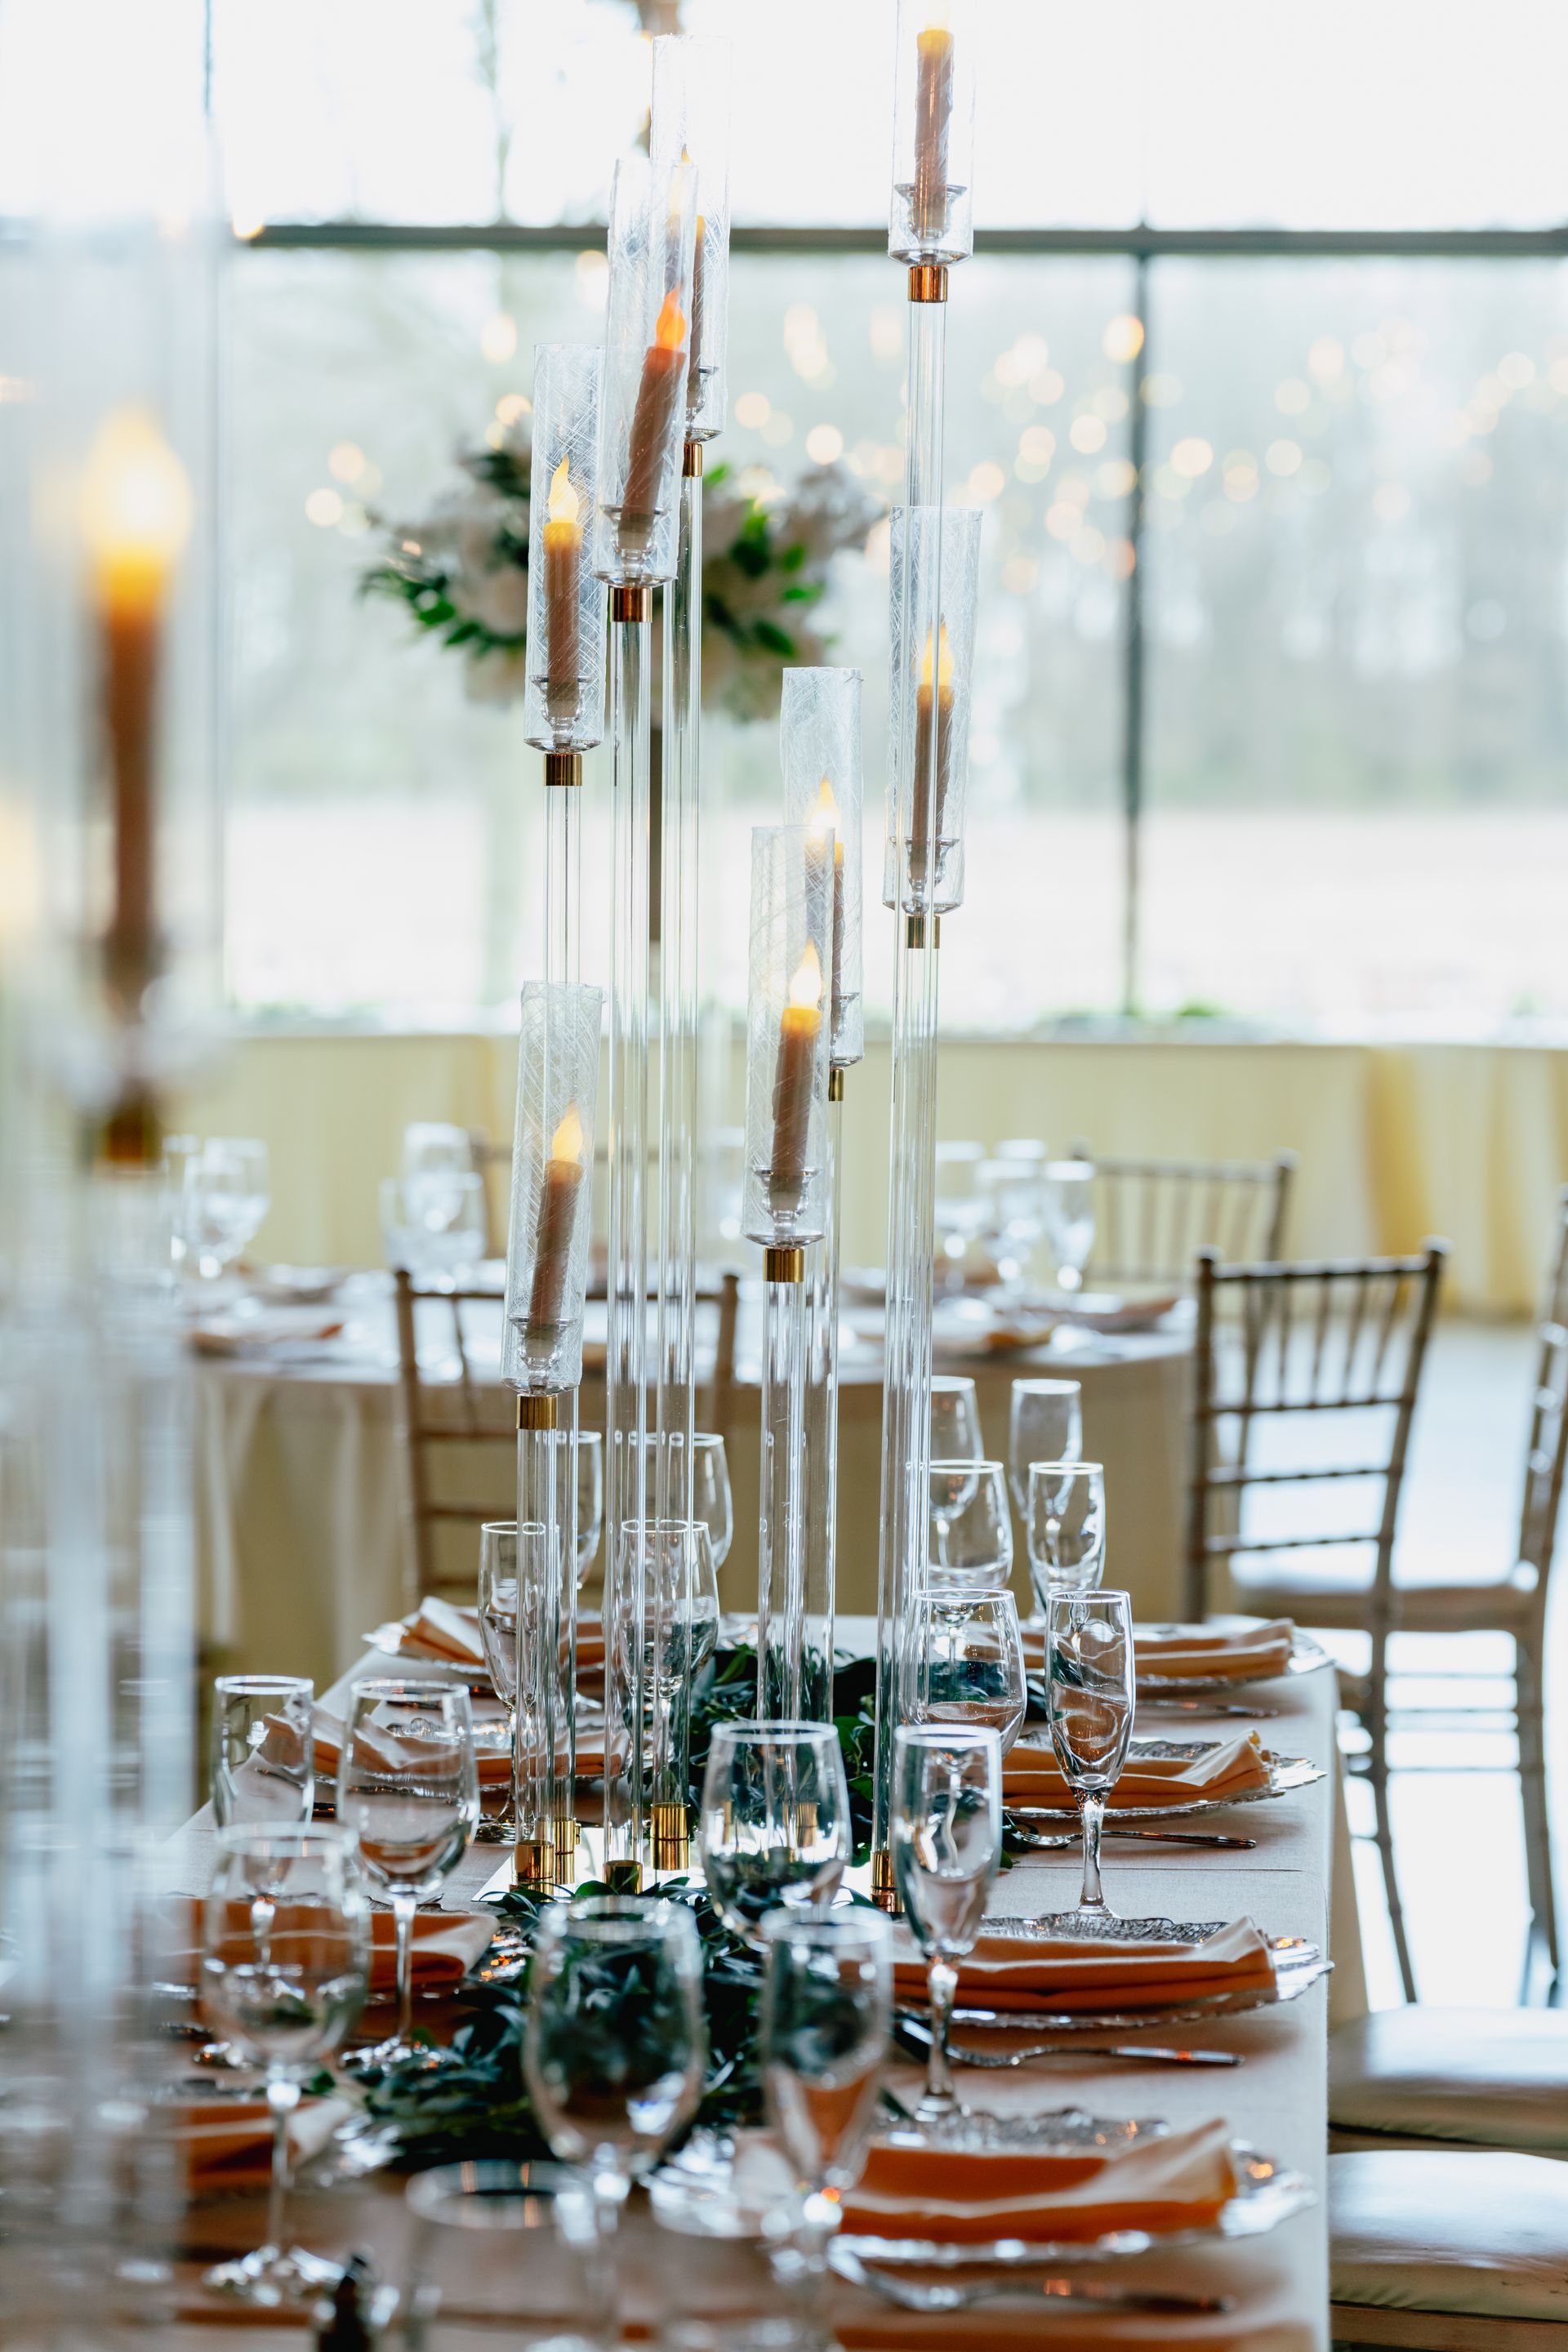 A long table set for a wedding reception with candles and plates.